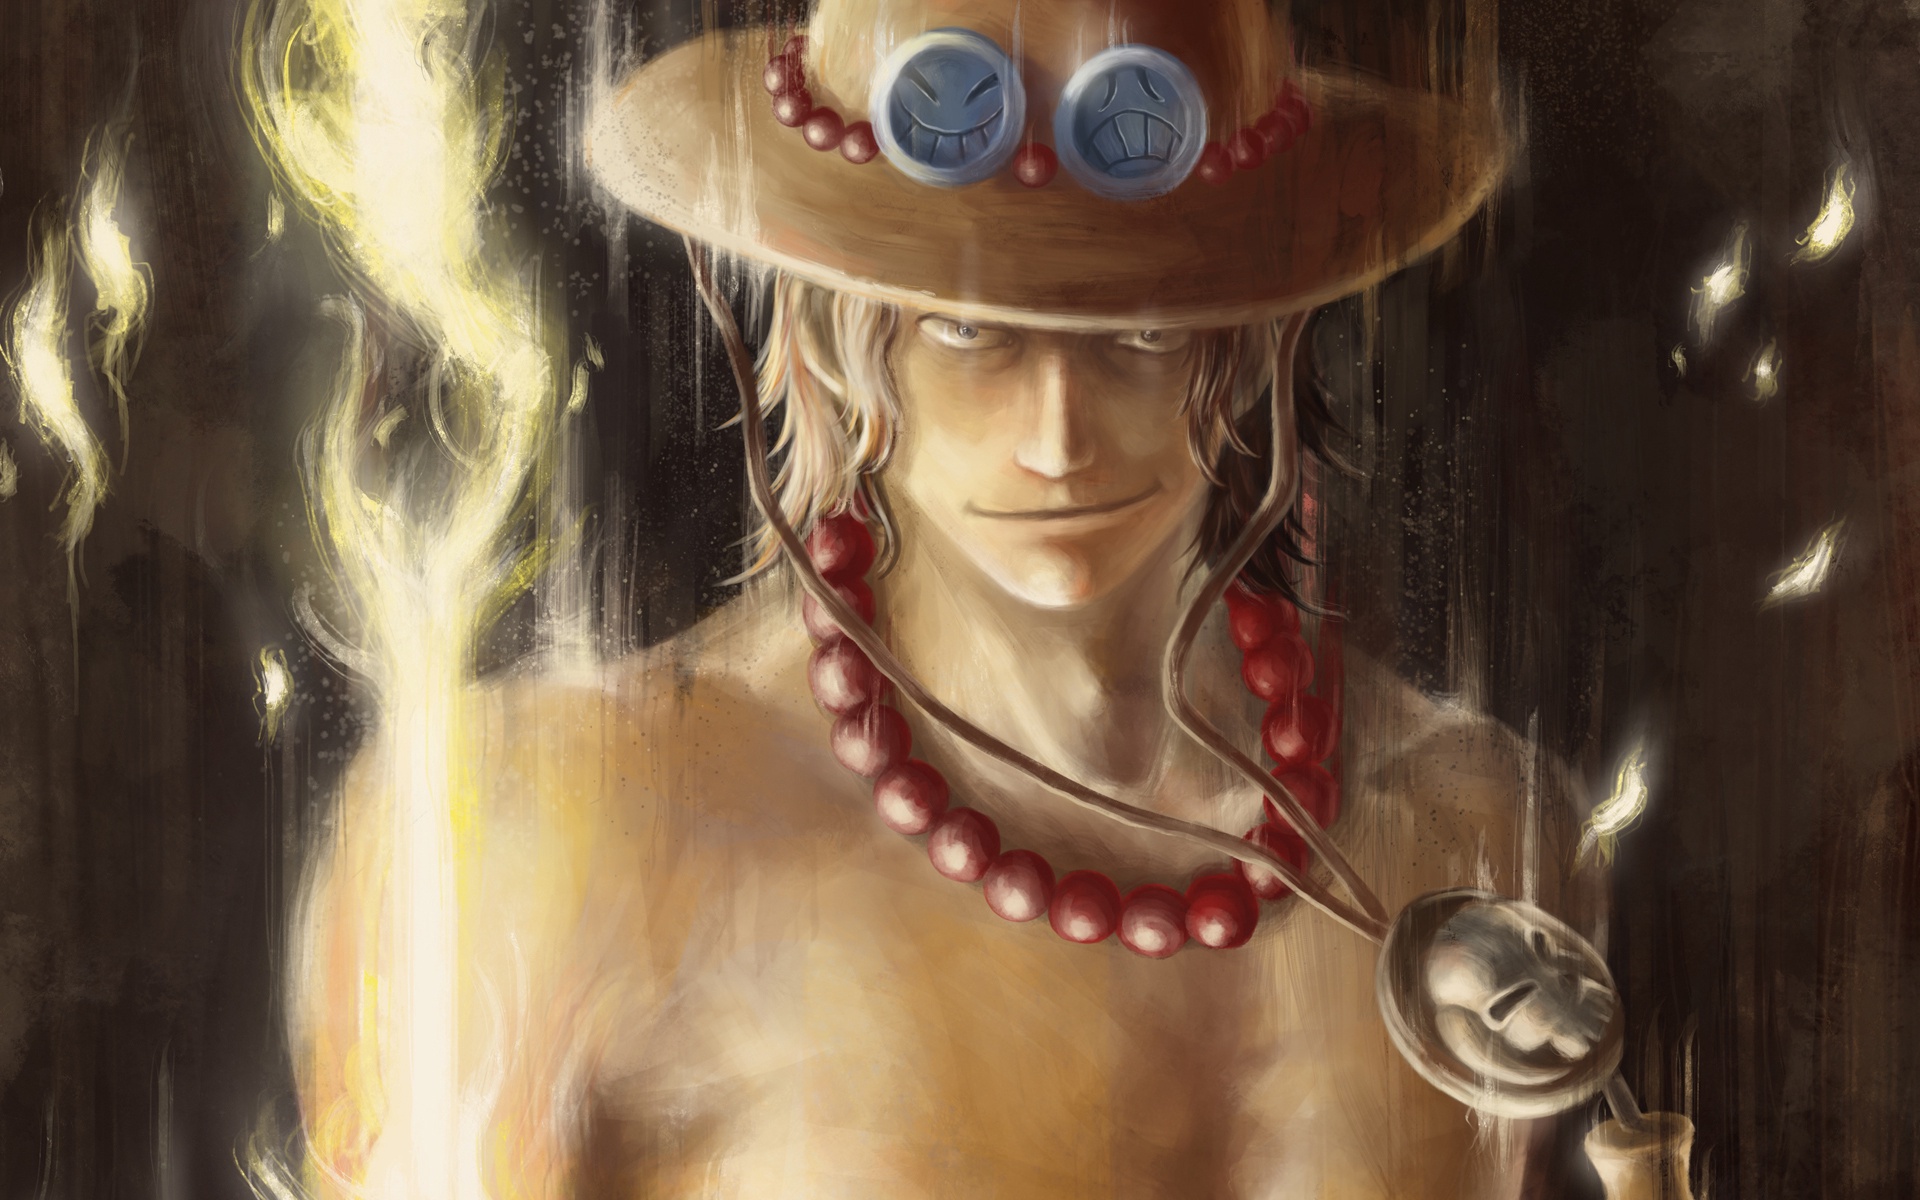 portgas d ace, one piece, anime wallpaper for mobile